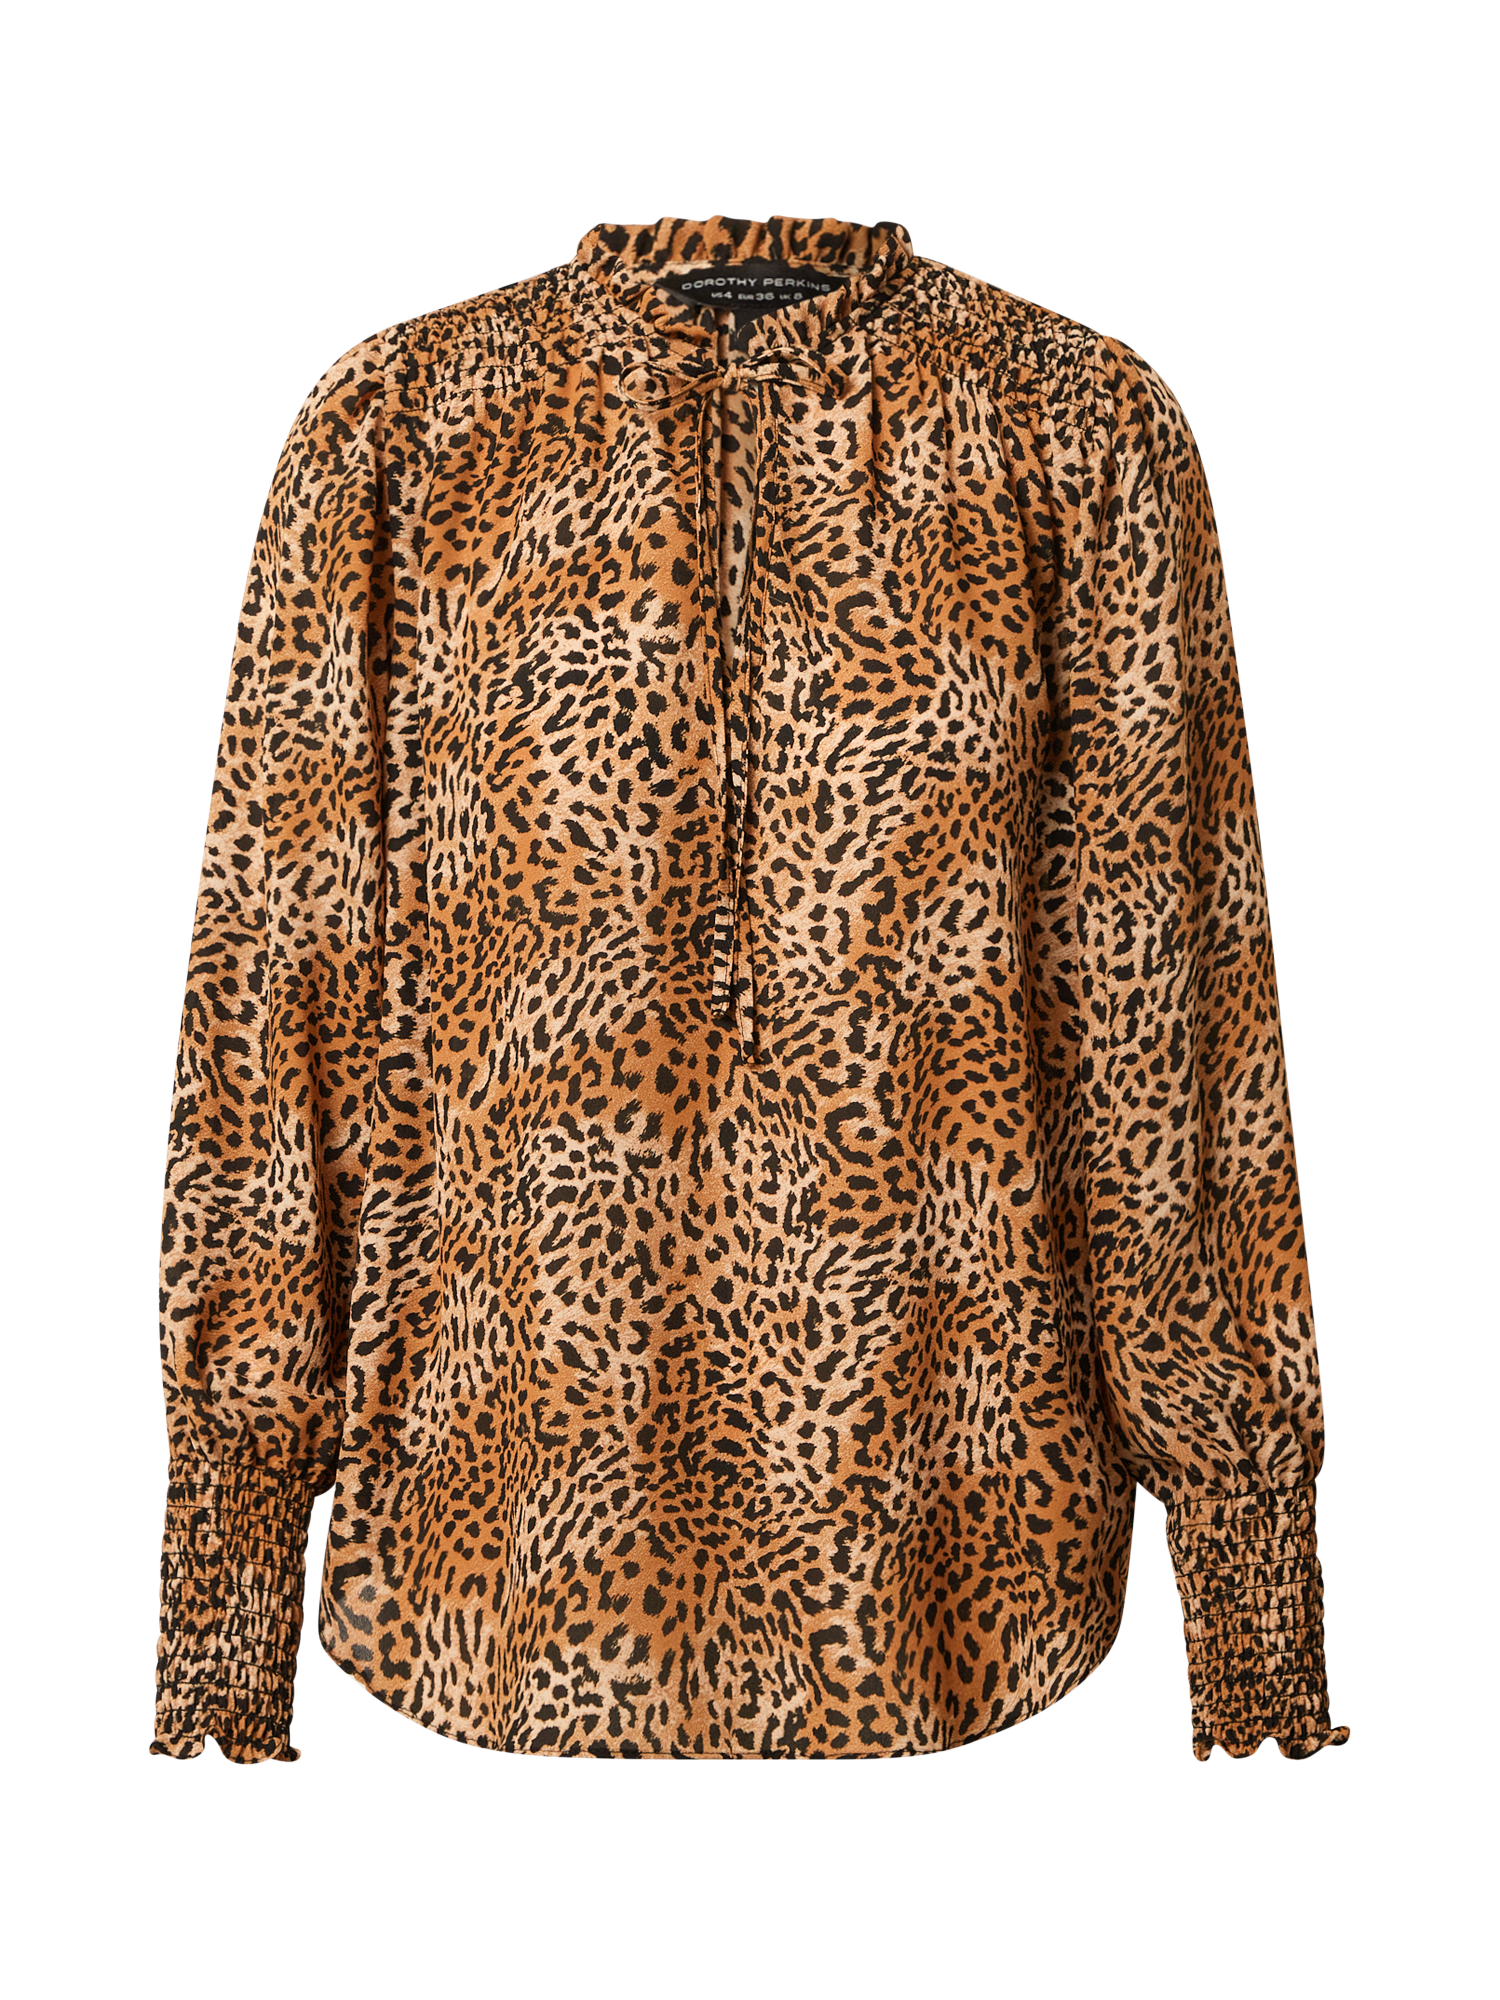 Dorothy Perkins Women/'s Tall Brown Leopard Print Curved Edge to Edge Coat Top